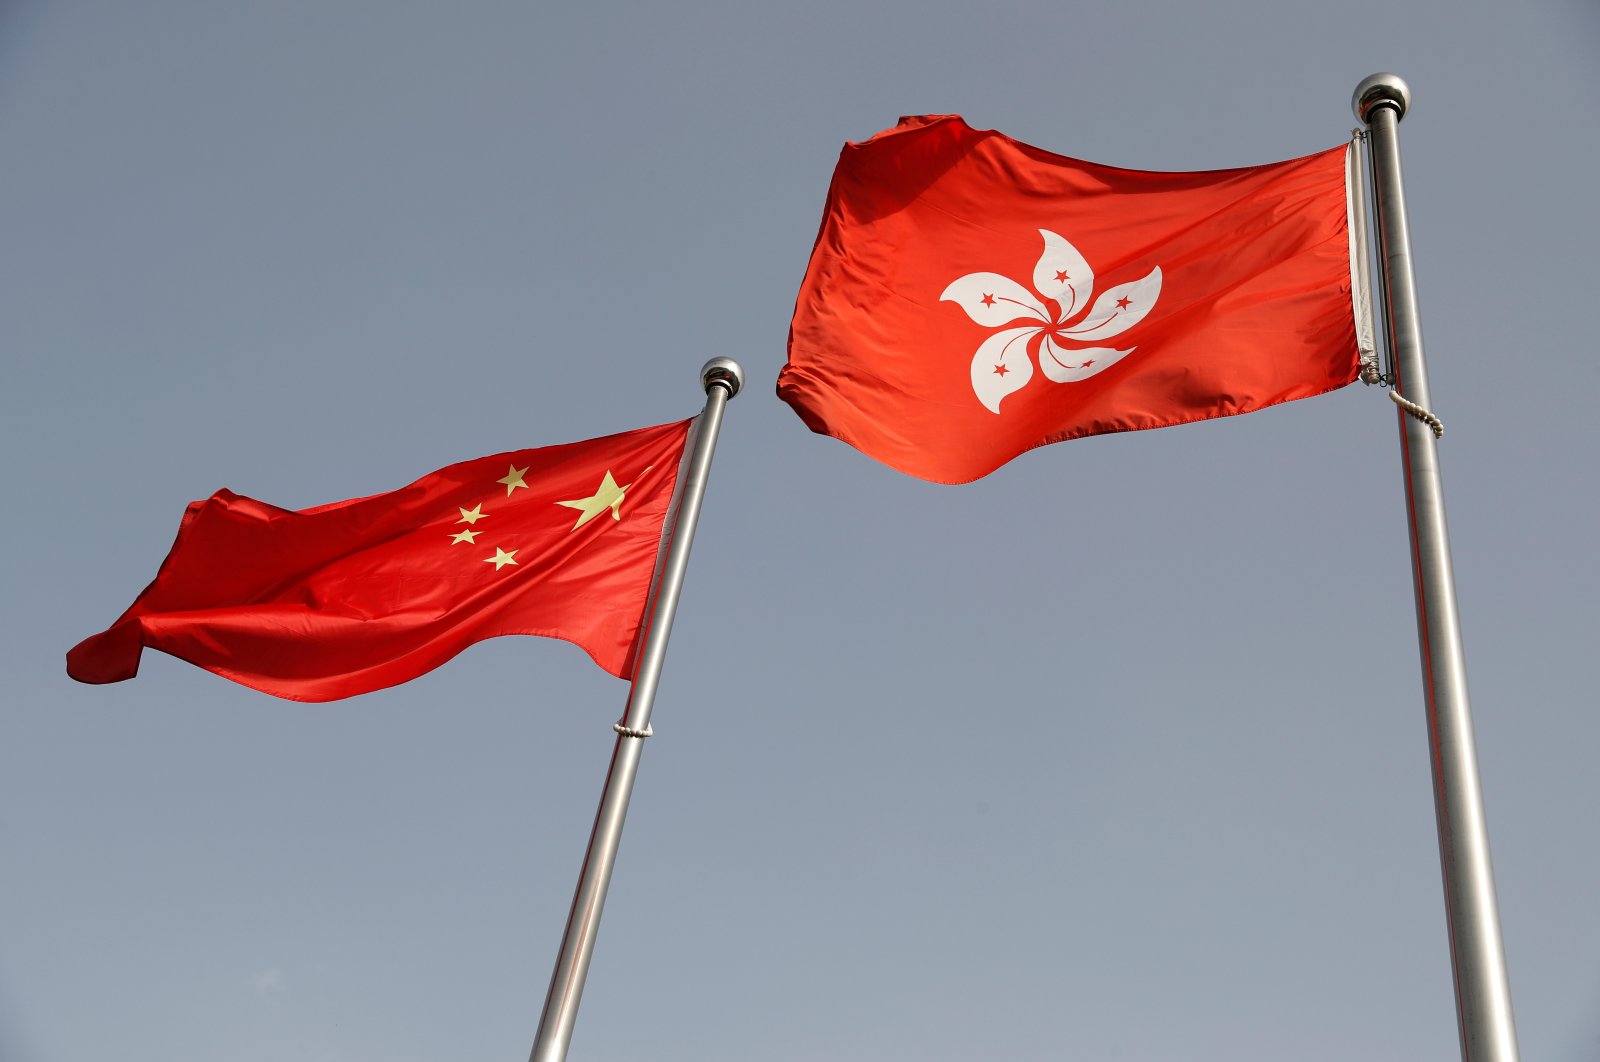 The Chinese and Hong Kong flags flutter at the office of the Government of the Hong Kong Special Administrative Region, ahead of a news conference held by Hong Kong Chief Executive Carrie Lam, in Beijing, China June 3, 2020. (Reuters Photo)